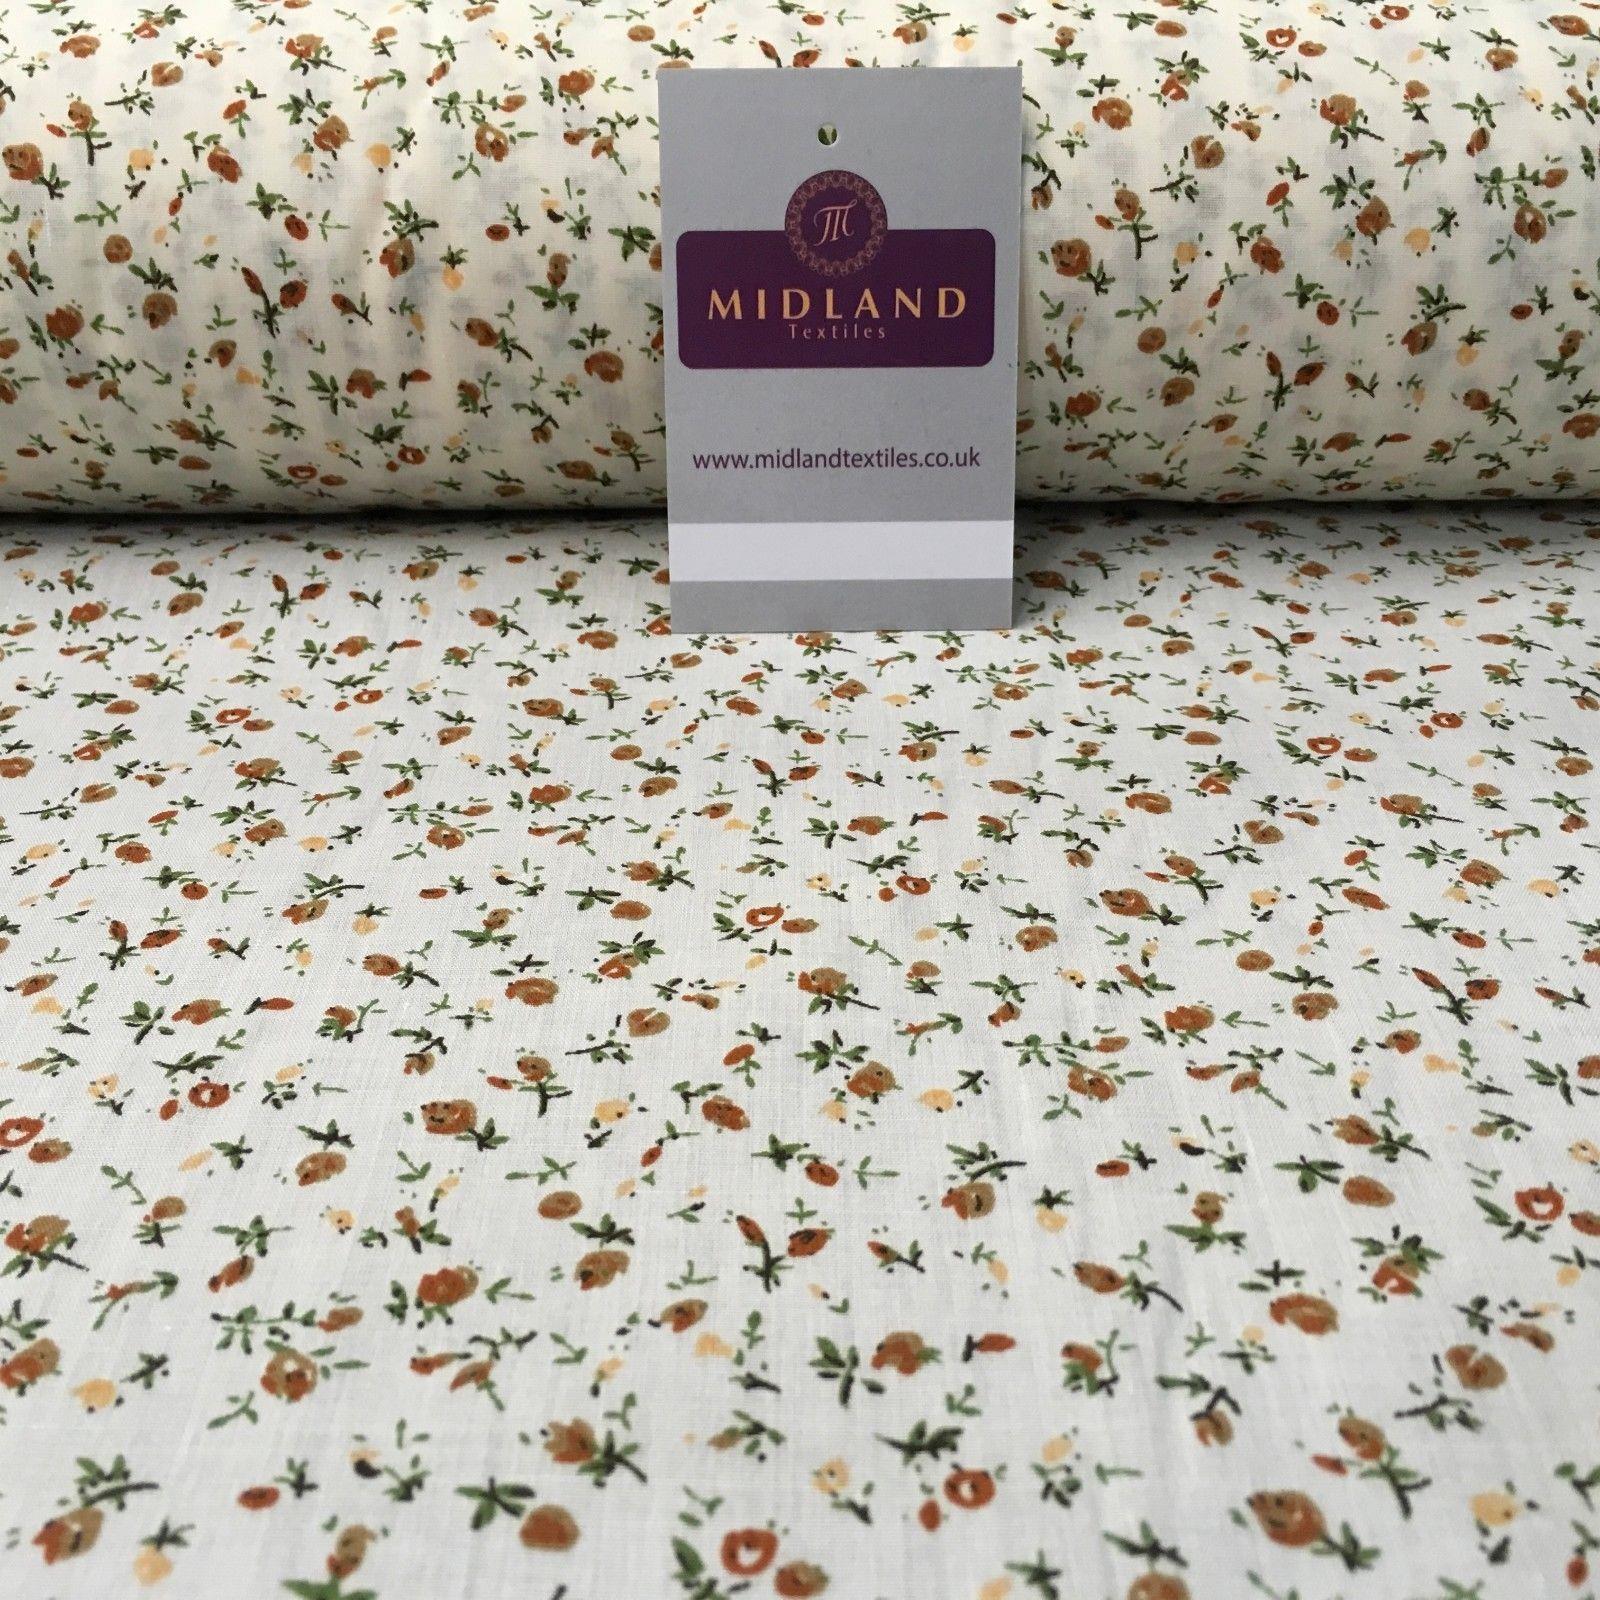 Cream Floral printed Polycotton Dress Fabric 44" wide ME882 Mtex